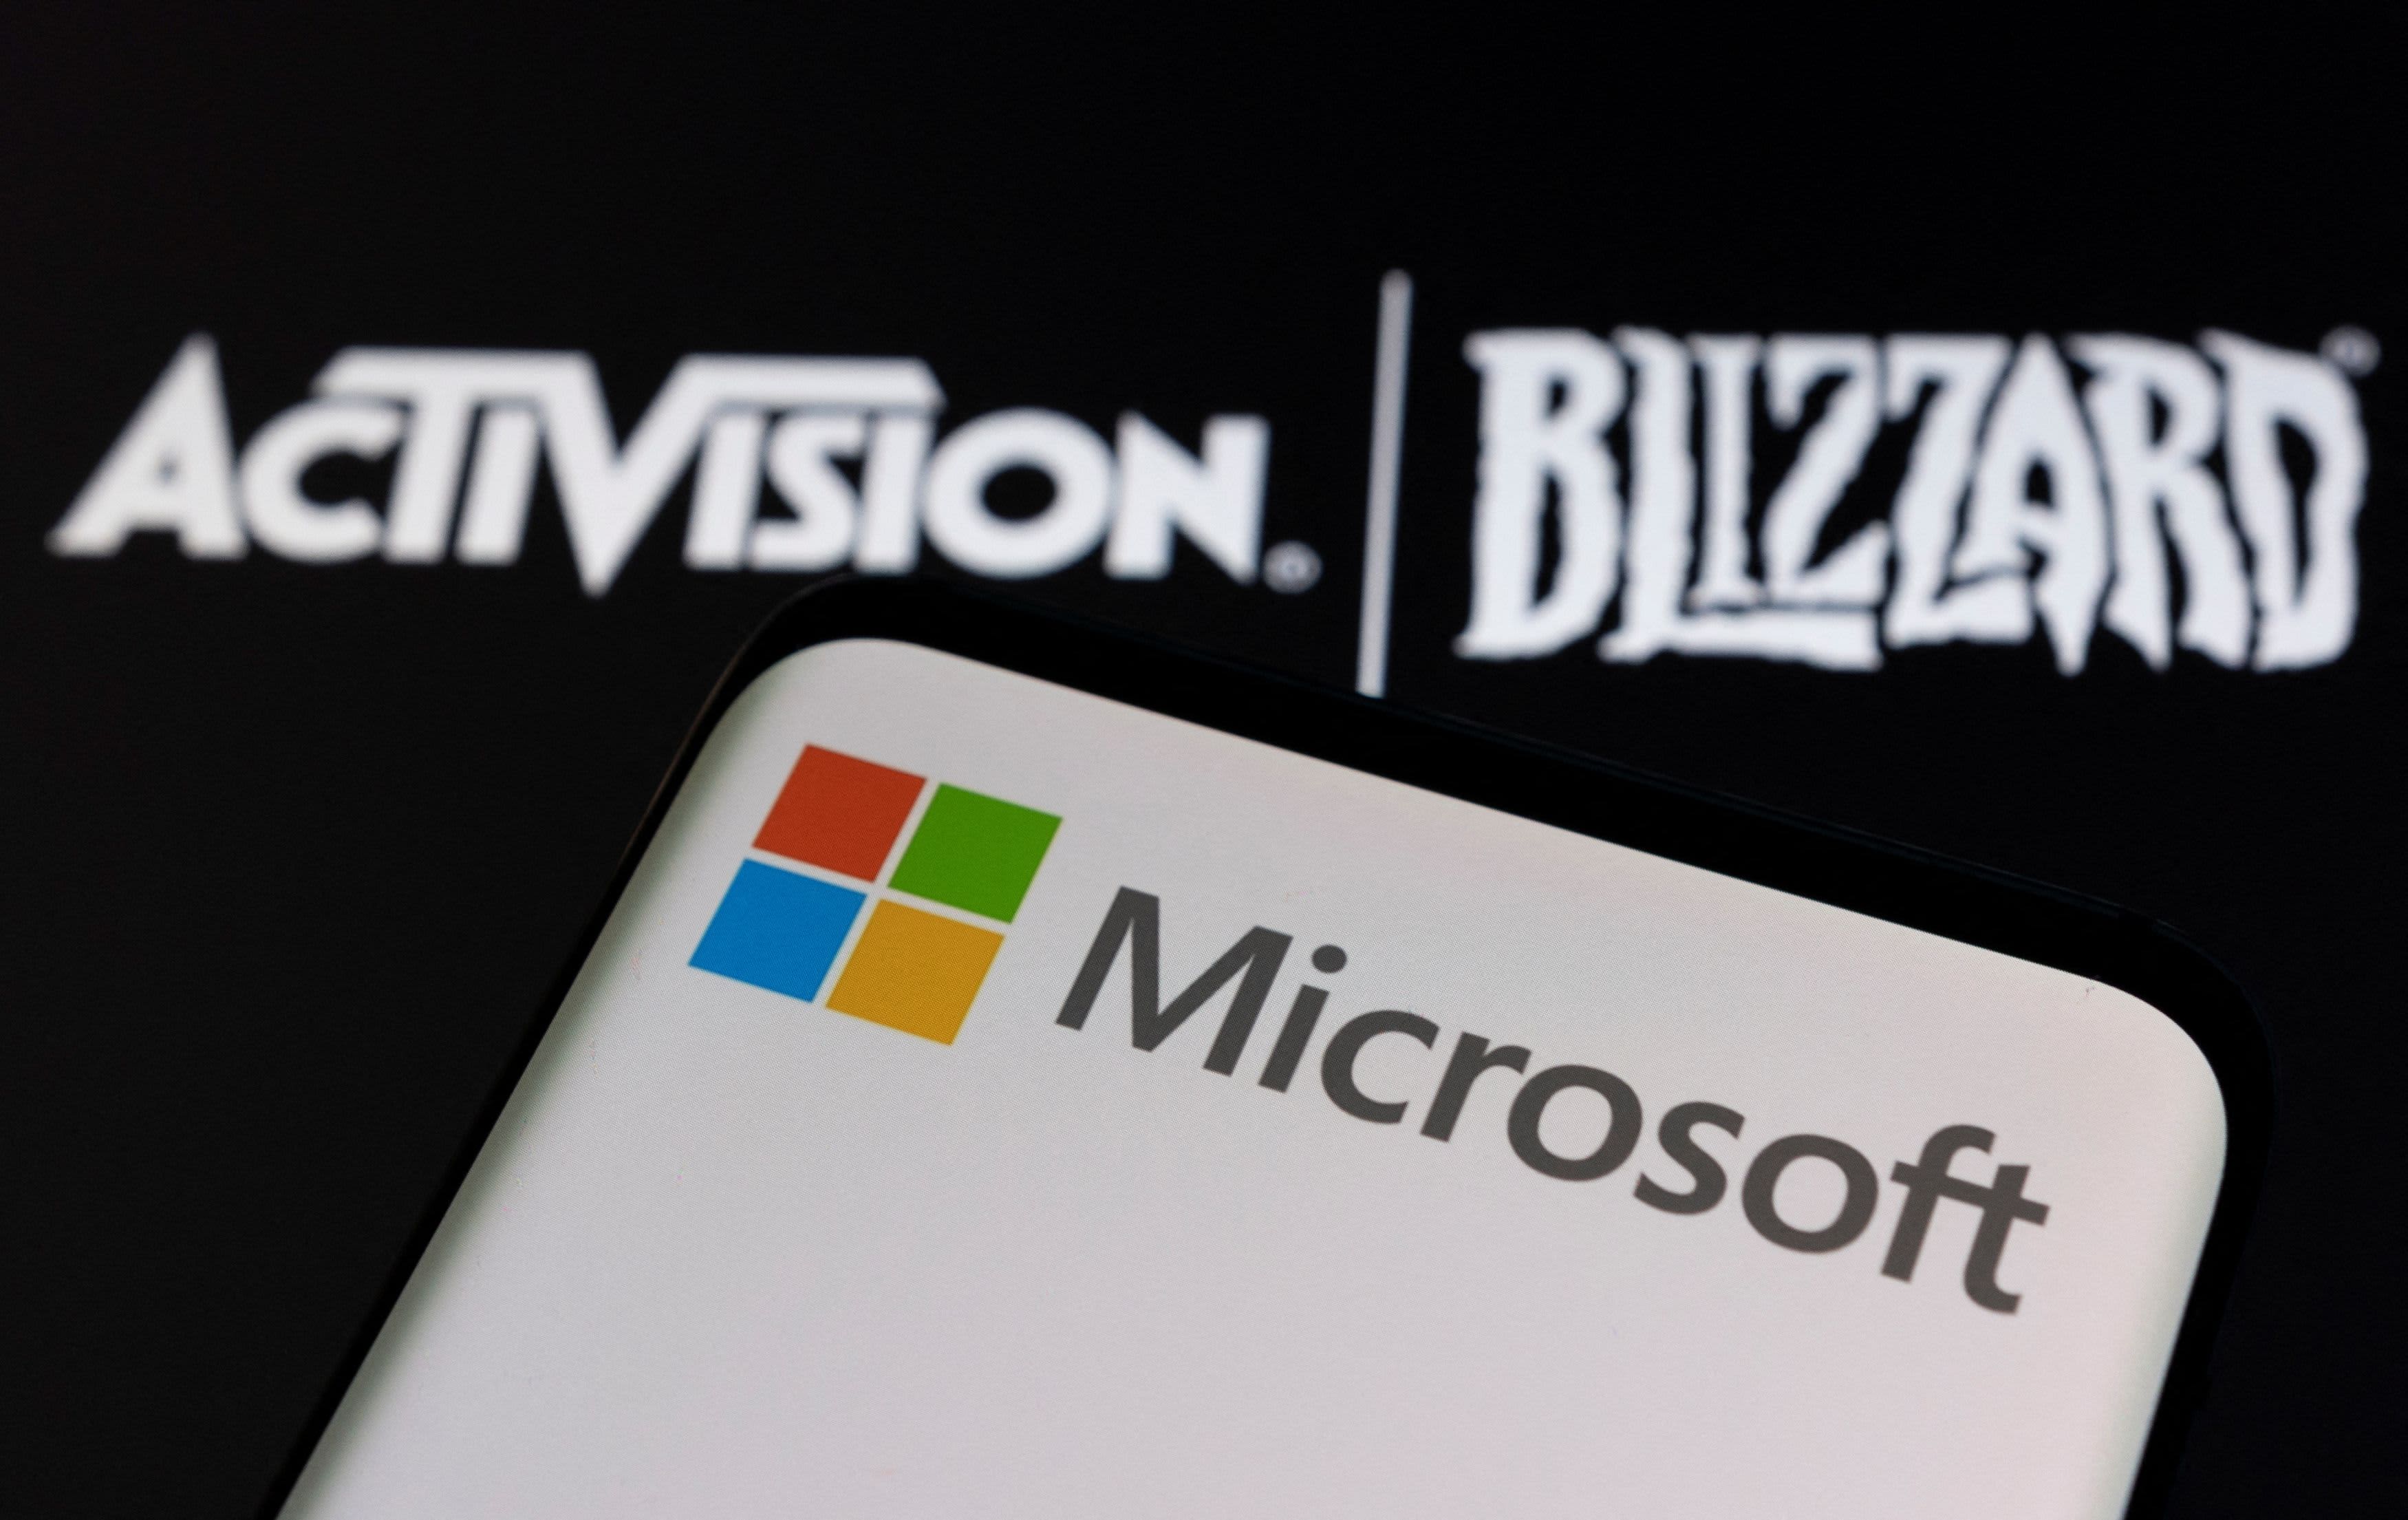 Game Pass Prices Will Not be Raised After Activision Blizzard Acquisition –  Microsoft